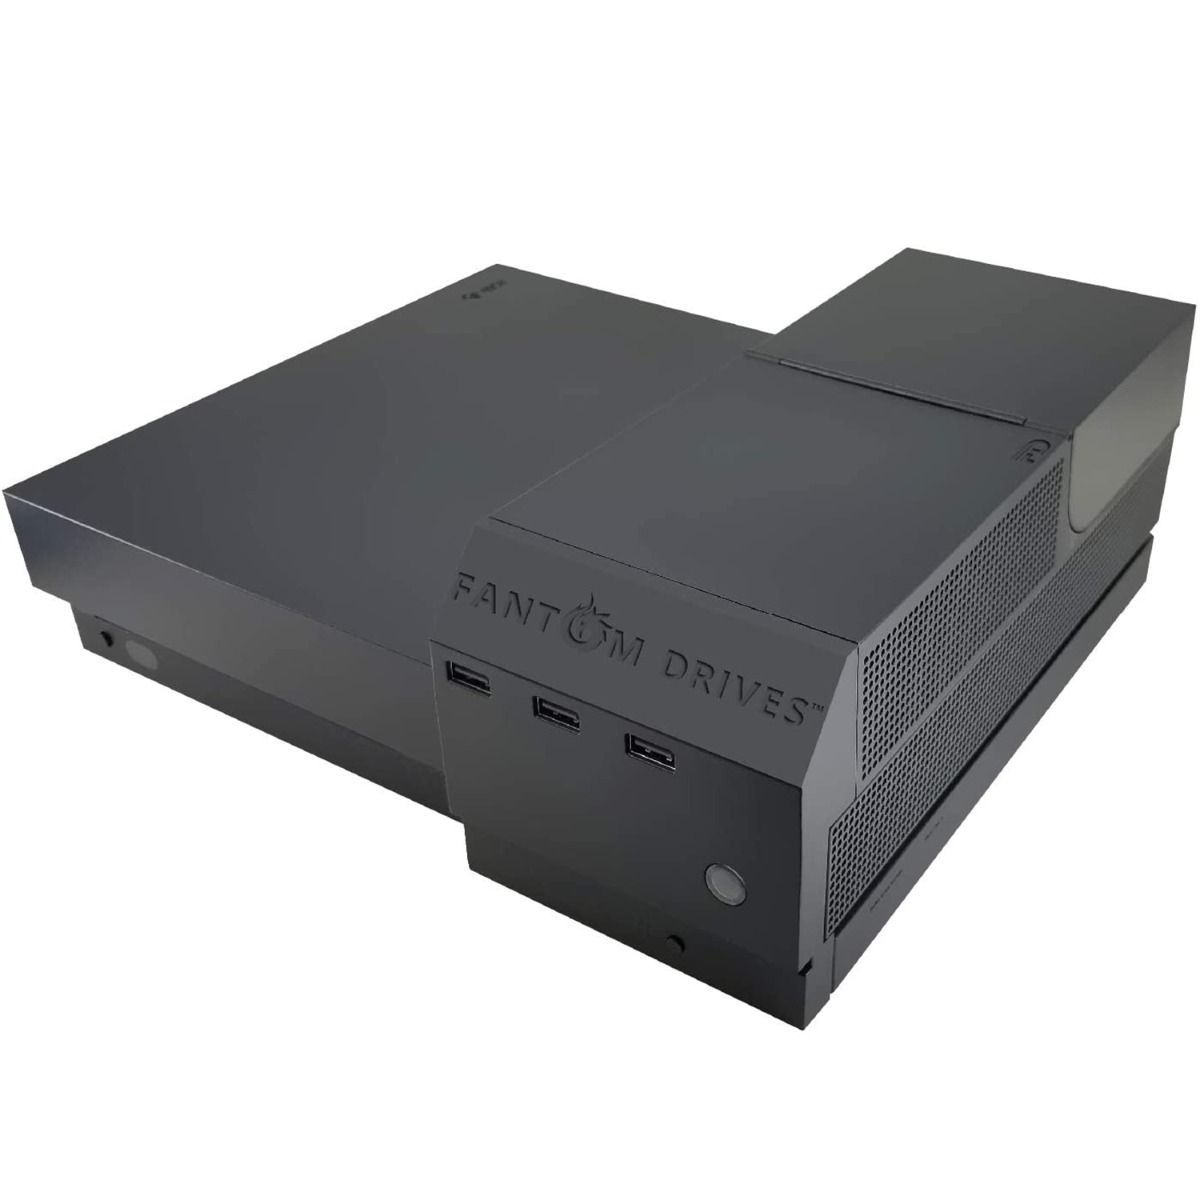 Fantom Drives Xbox One 2TB Hard Drive Easy Snap On Attachment with 3 USB3.0 Port 